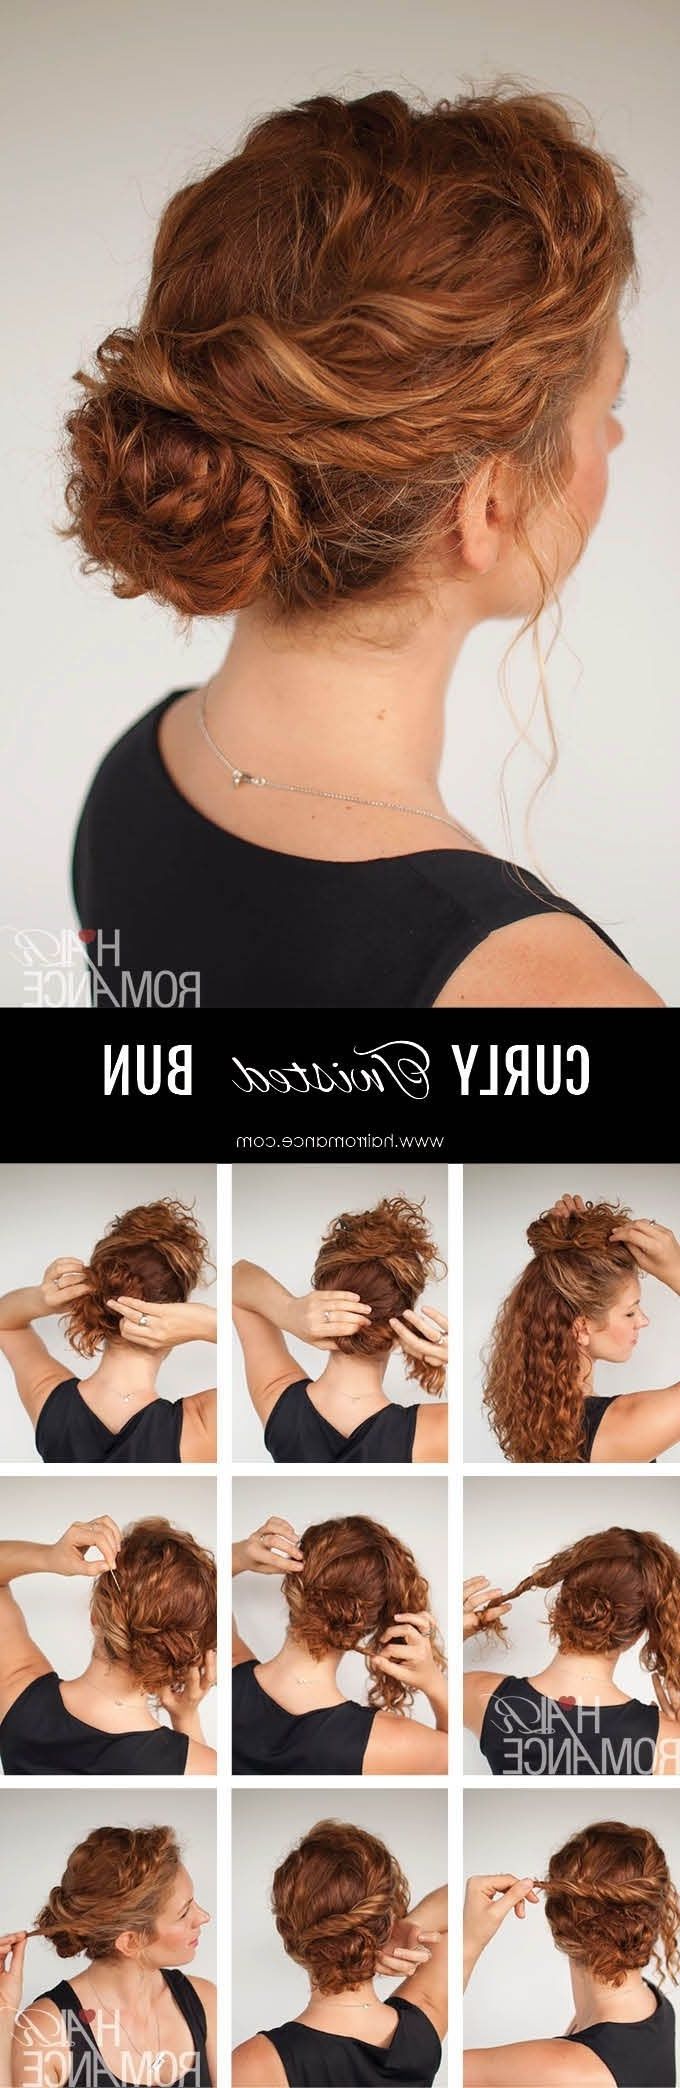 Find An Everyday Easy Updo For Faster Styling | Hair Romance Curly With Casual Updos For Curly Hair (View 6 of 15)